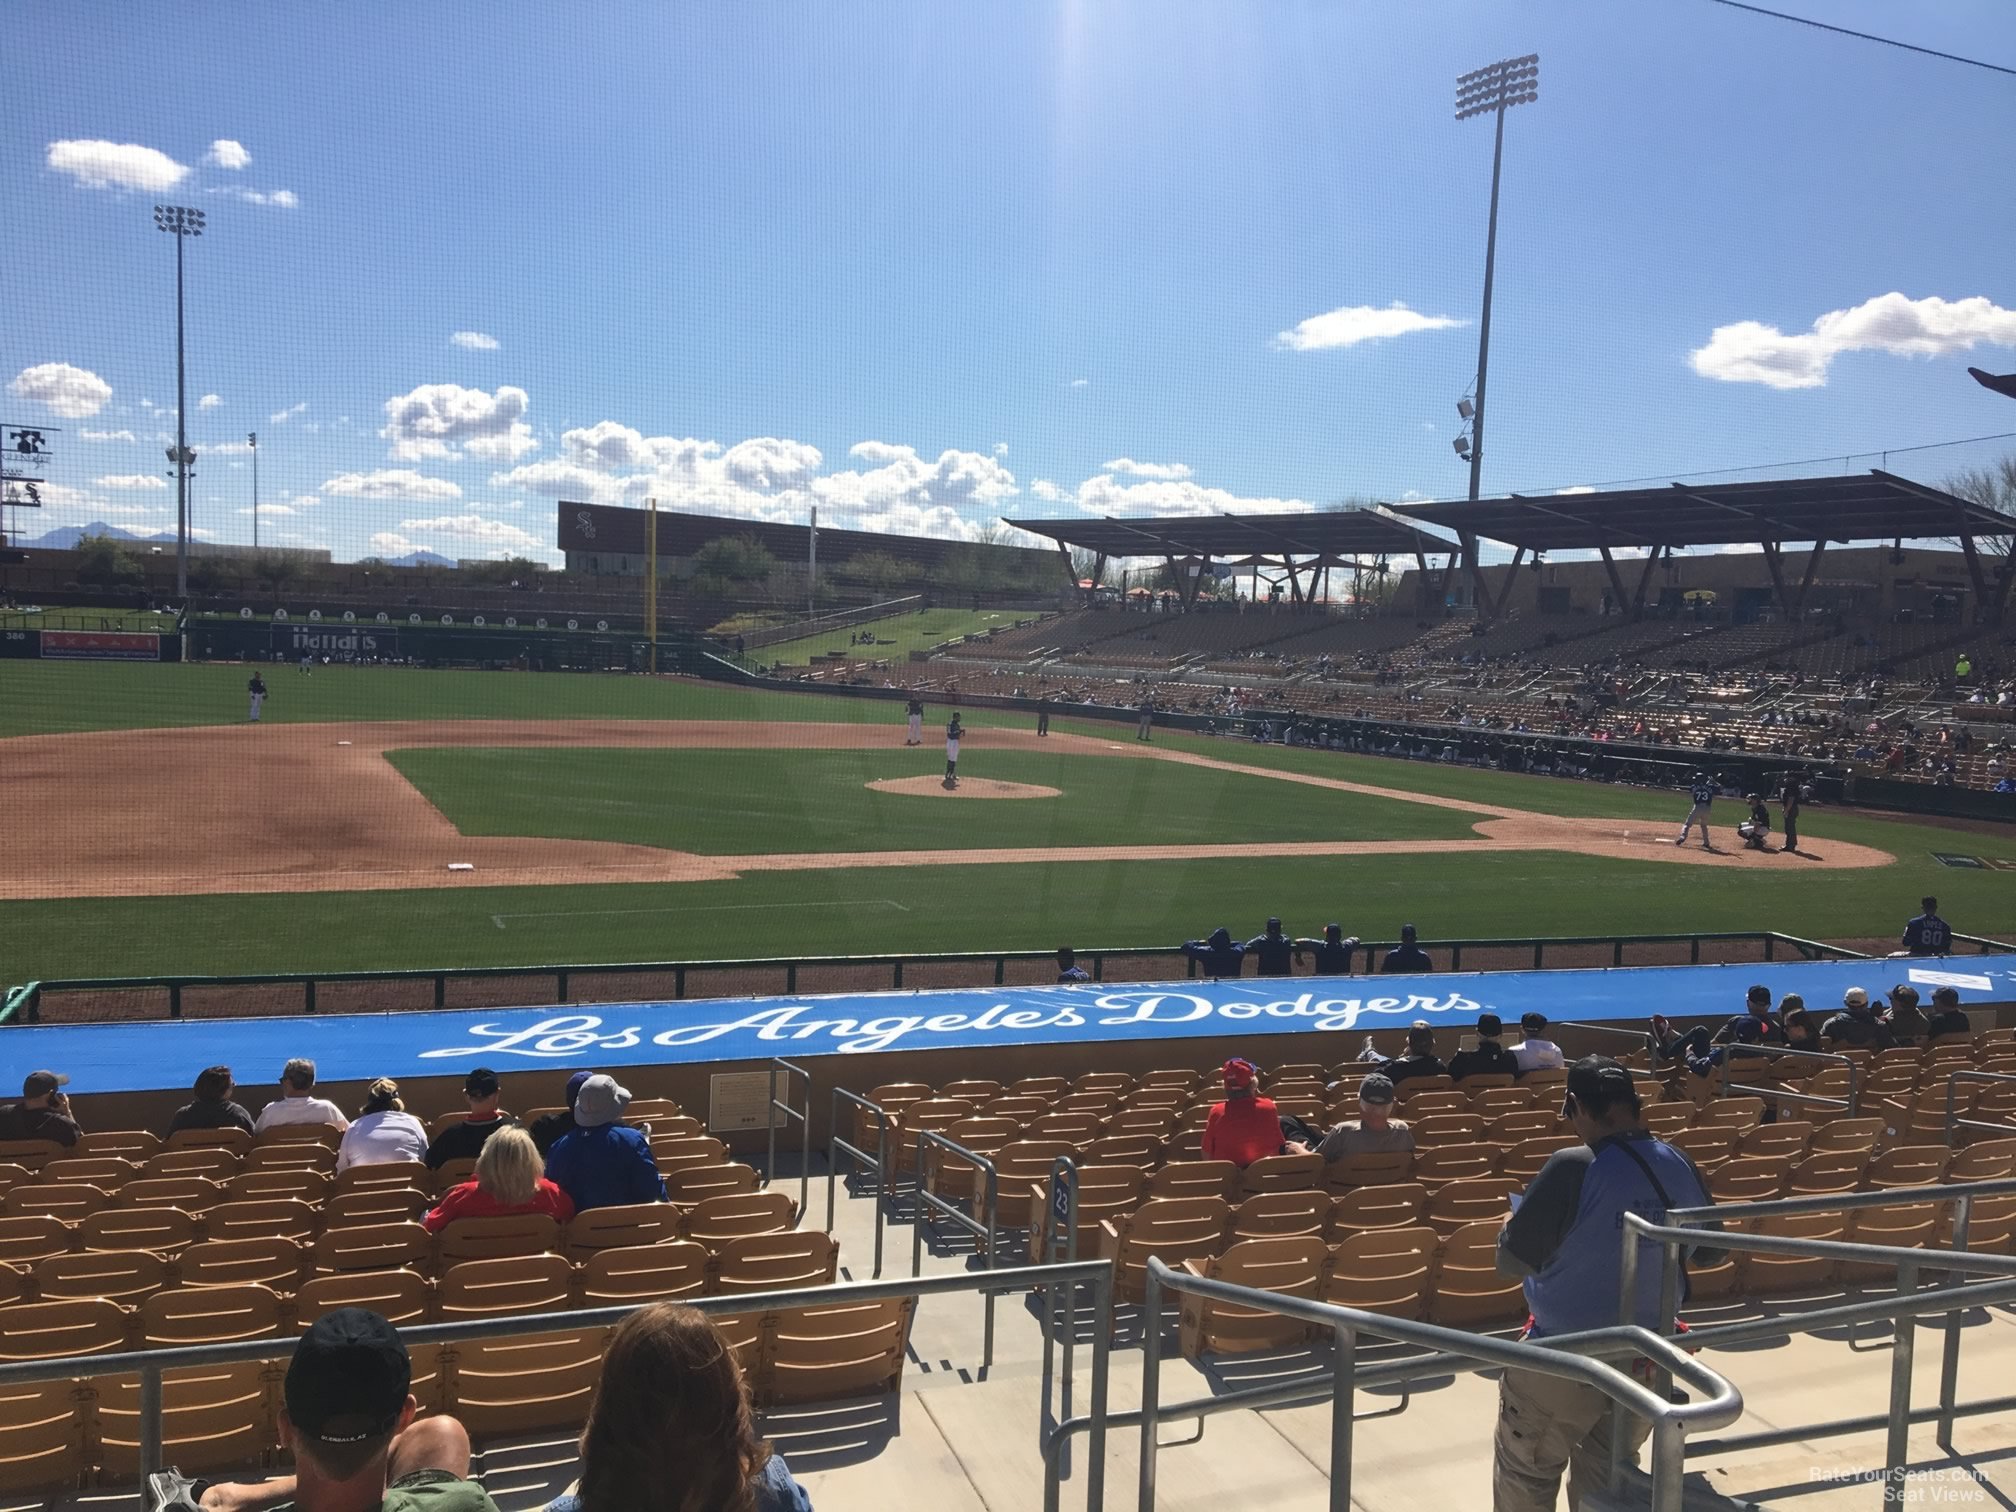 section 123, row 5 seat view  - camelback ranch